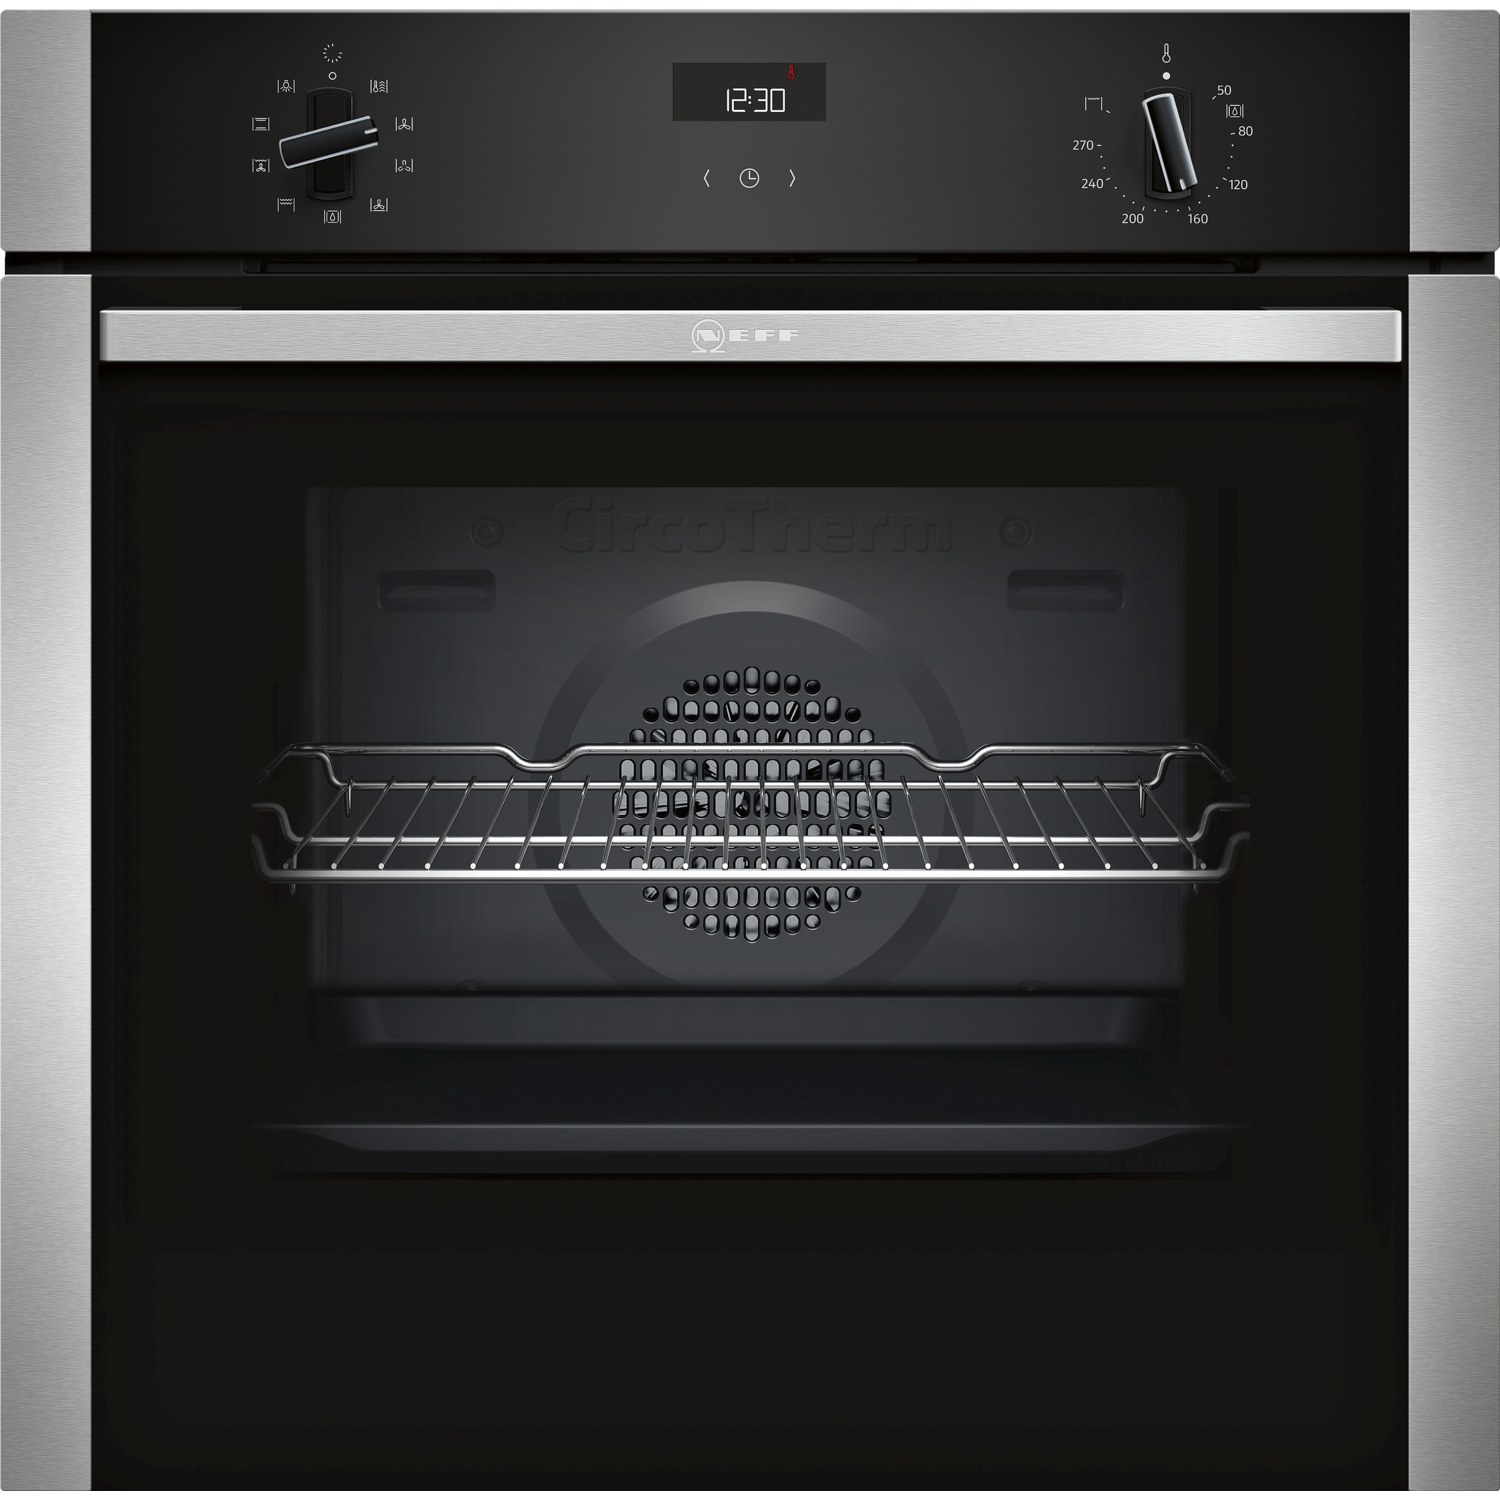 Neff N50 Single Oven with Catalytic Cleaning - Stainless Steel